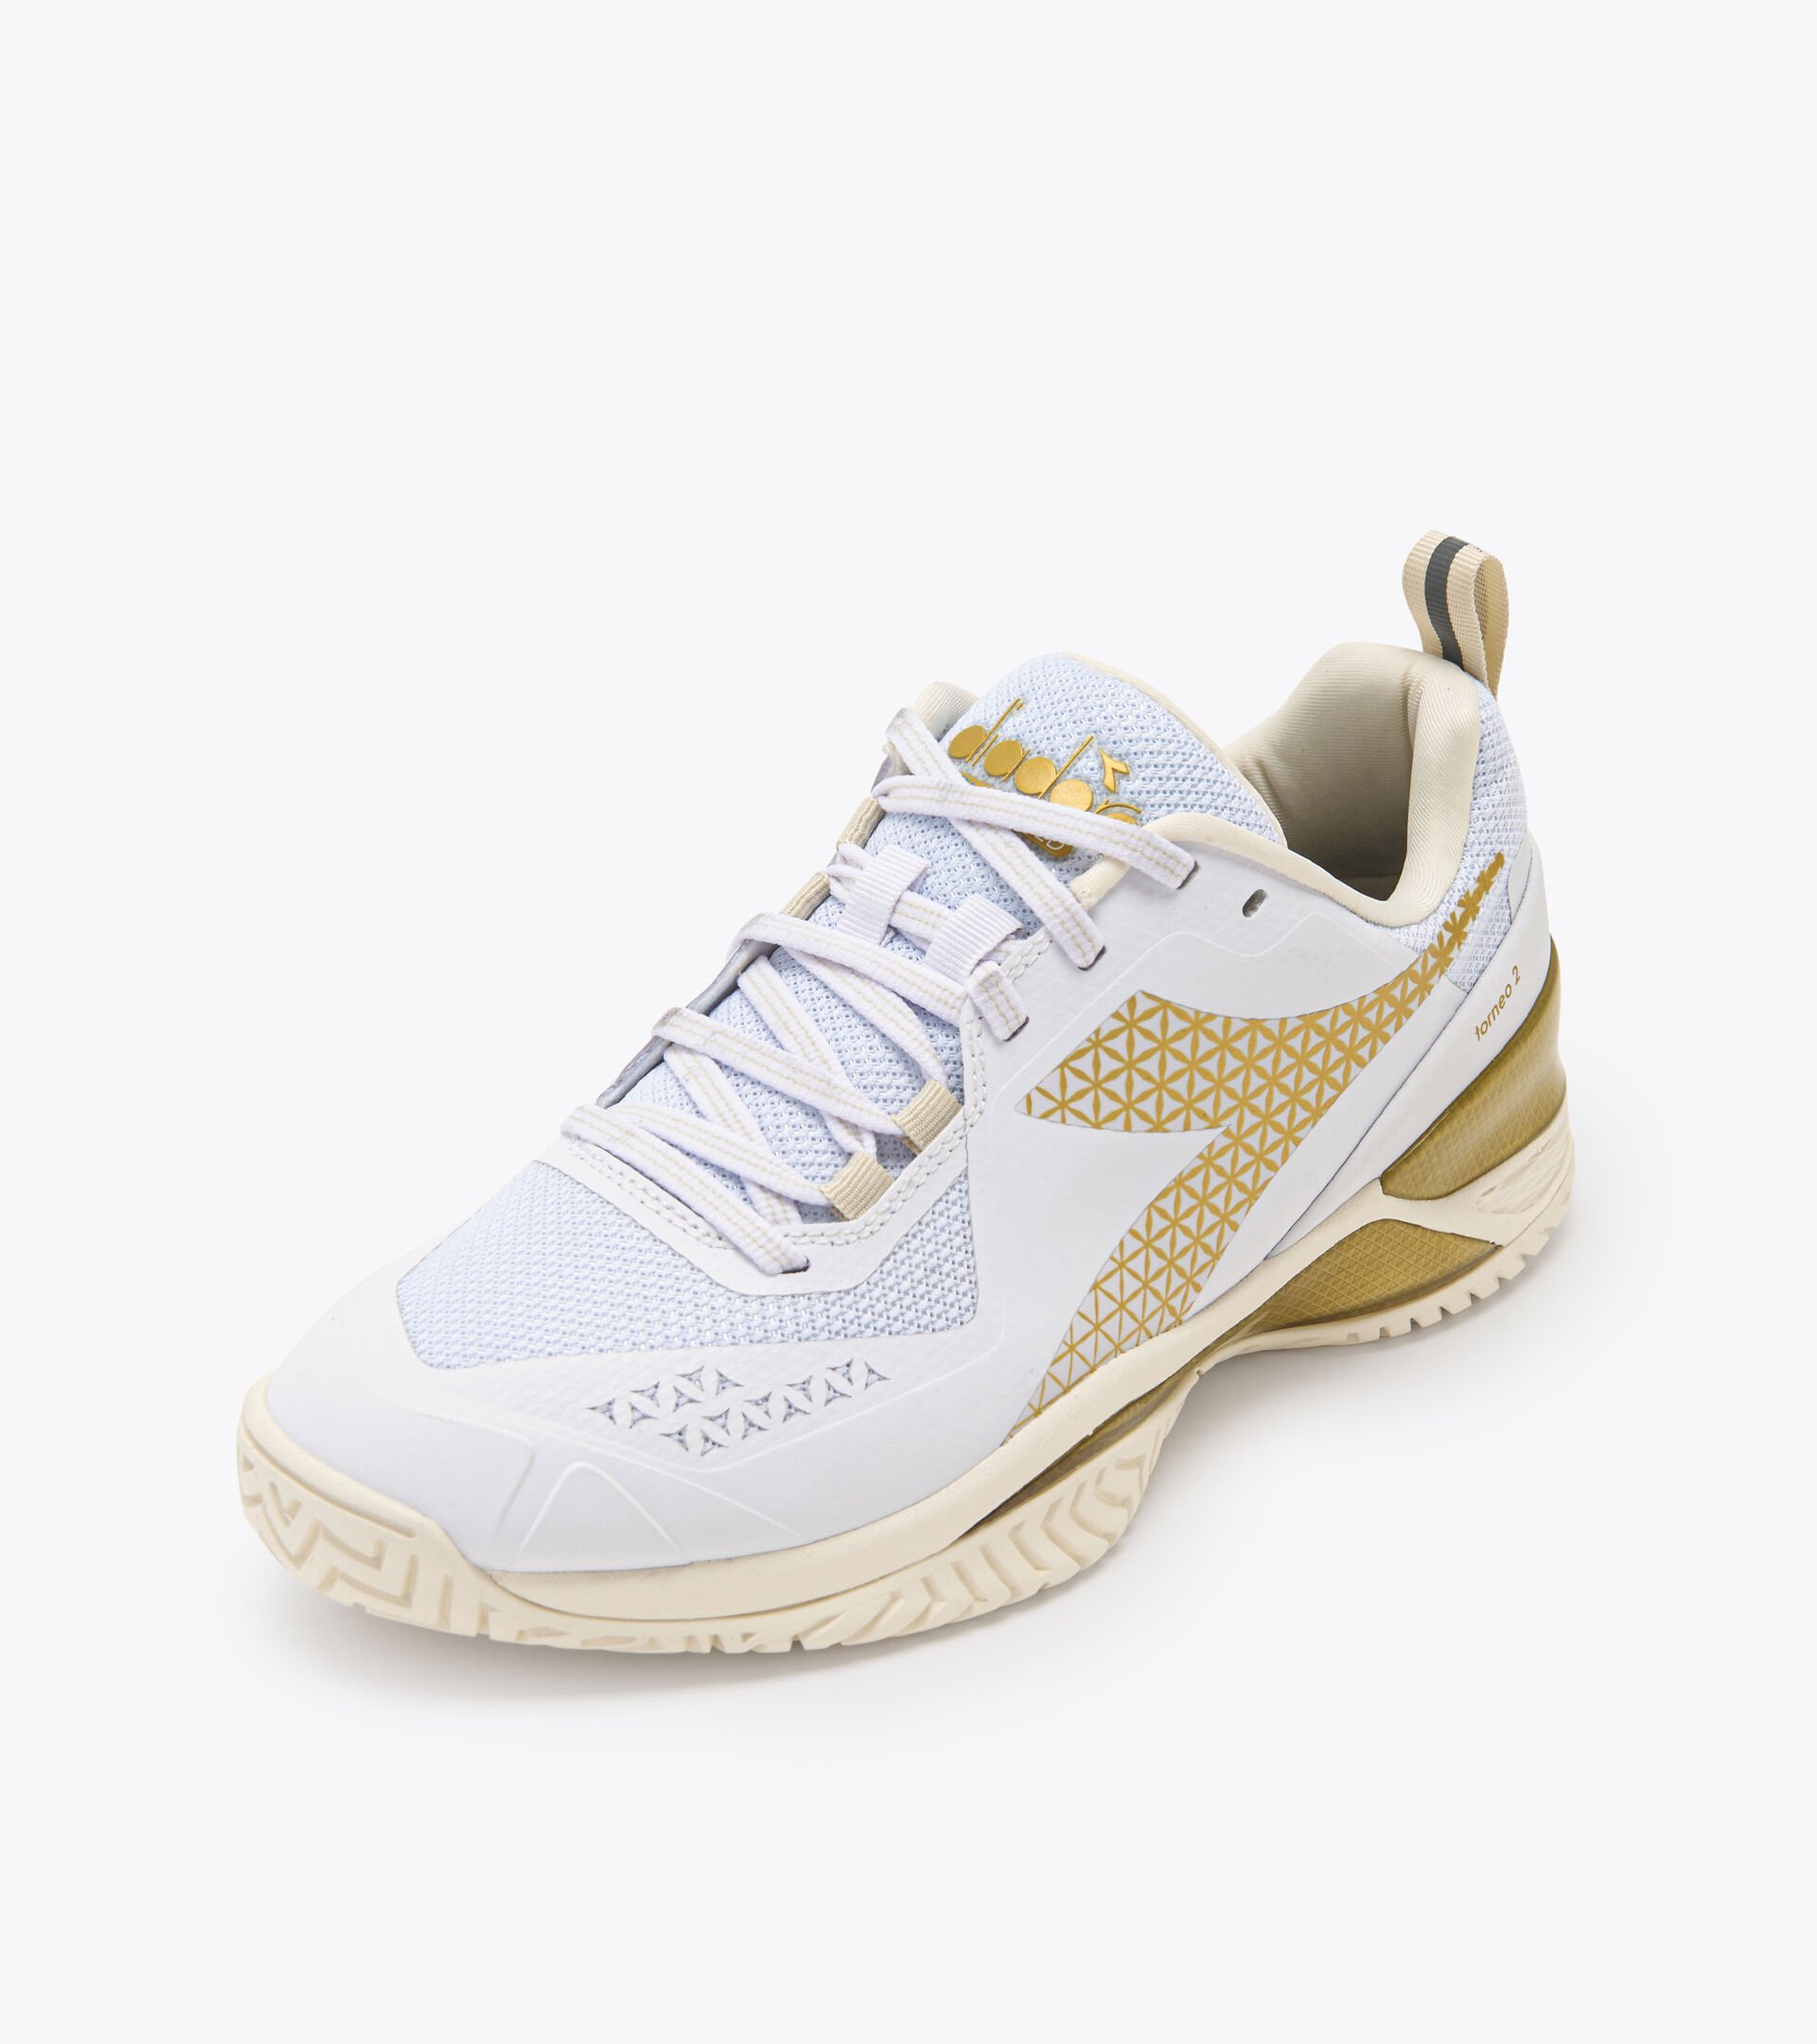 Tennis shoes for hard surfaces or clay courts - Women BLUSHIELD TORNEO 2 W AG WHITE/GOLD - Diadora